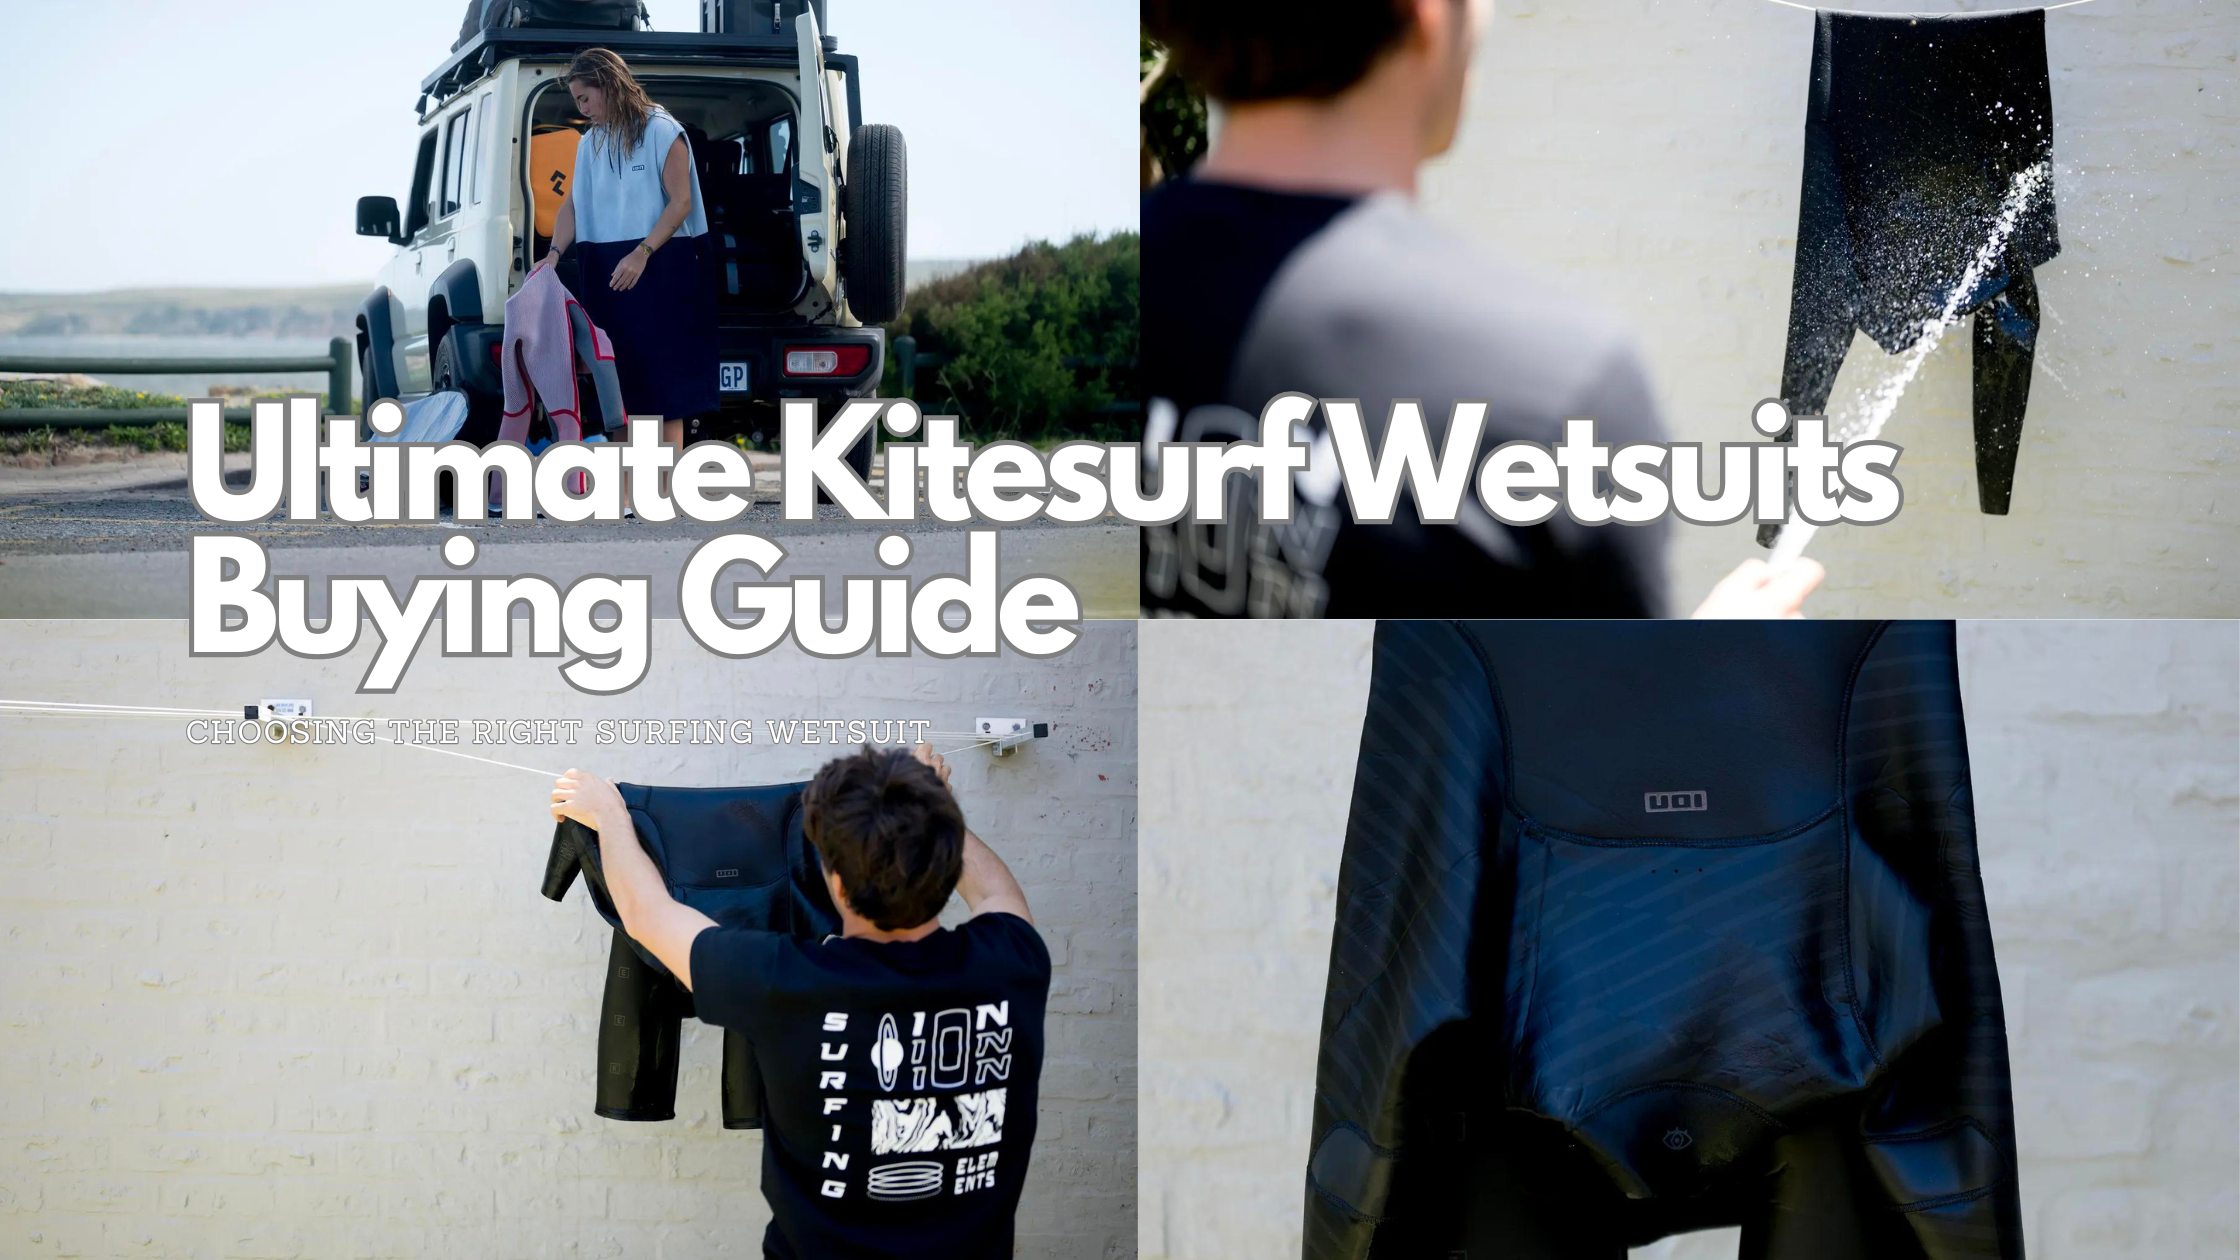 Ultimate Kitesurf Wetsuits Buying Guide: Choosing the Right Surfing Wetsuit